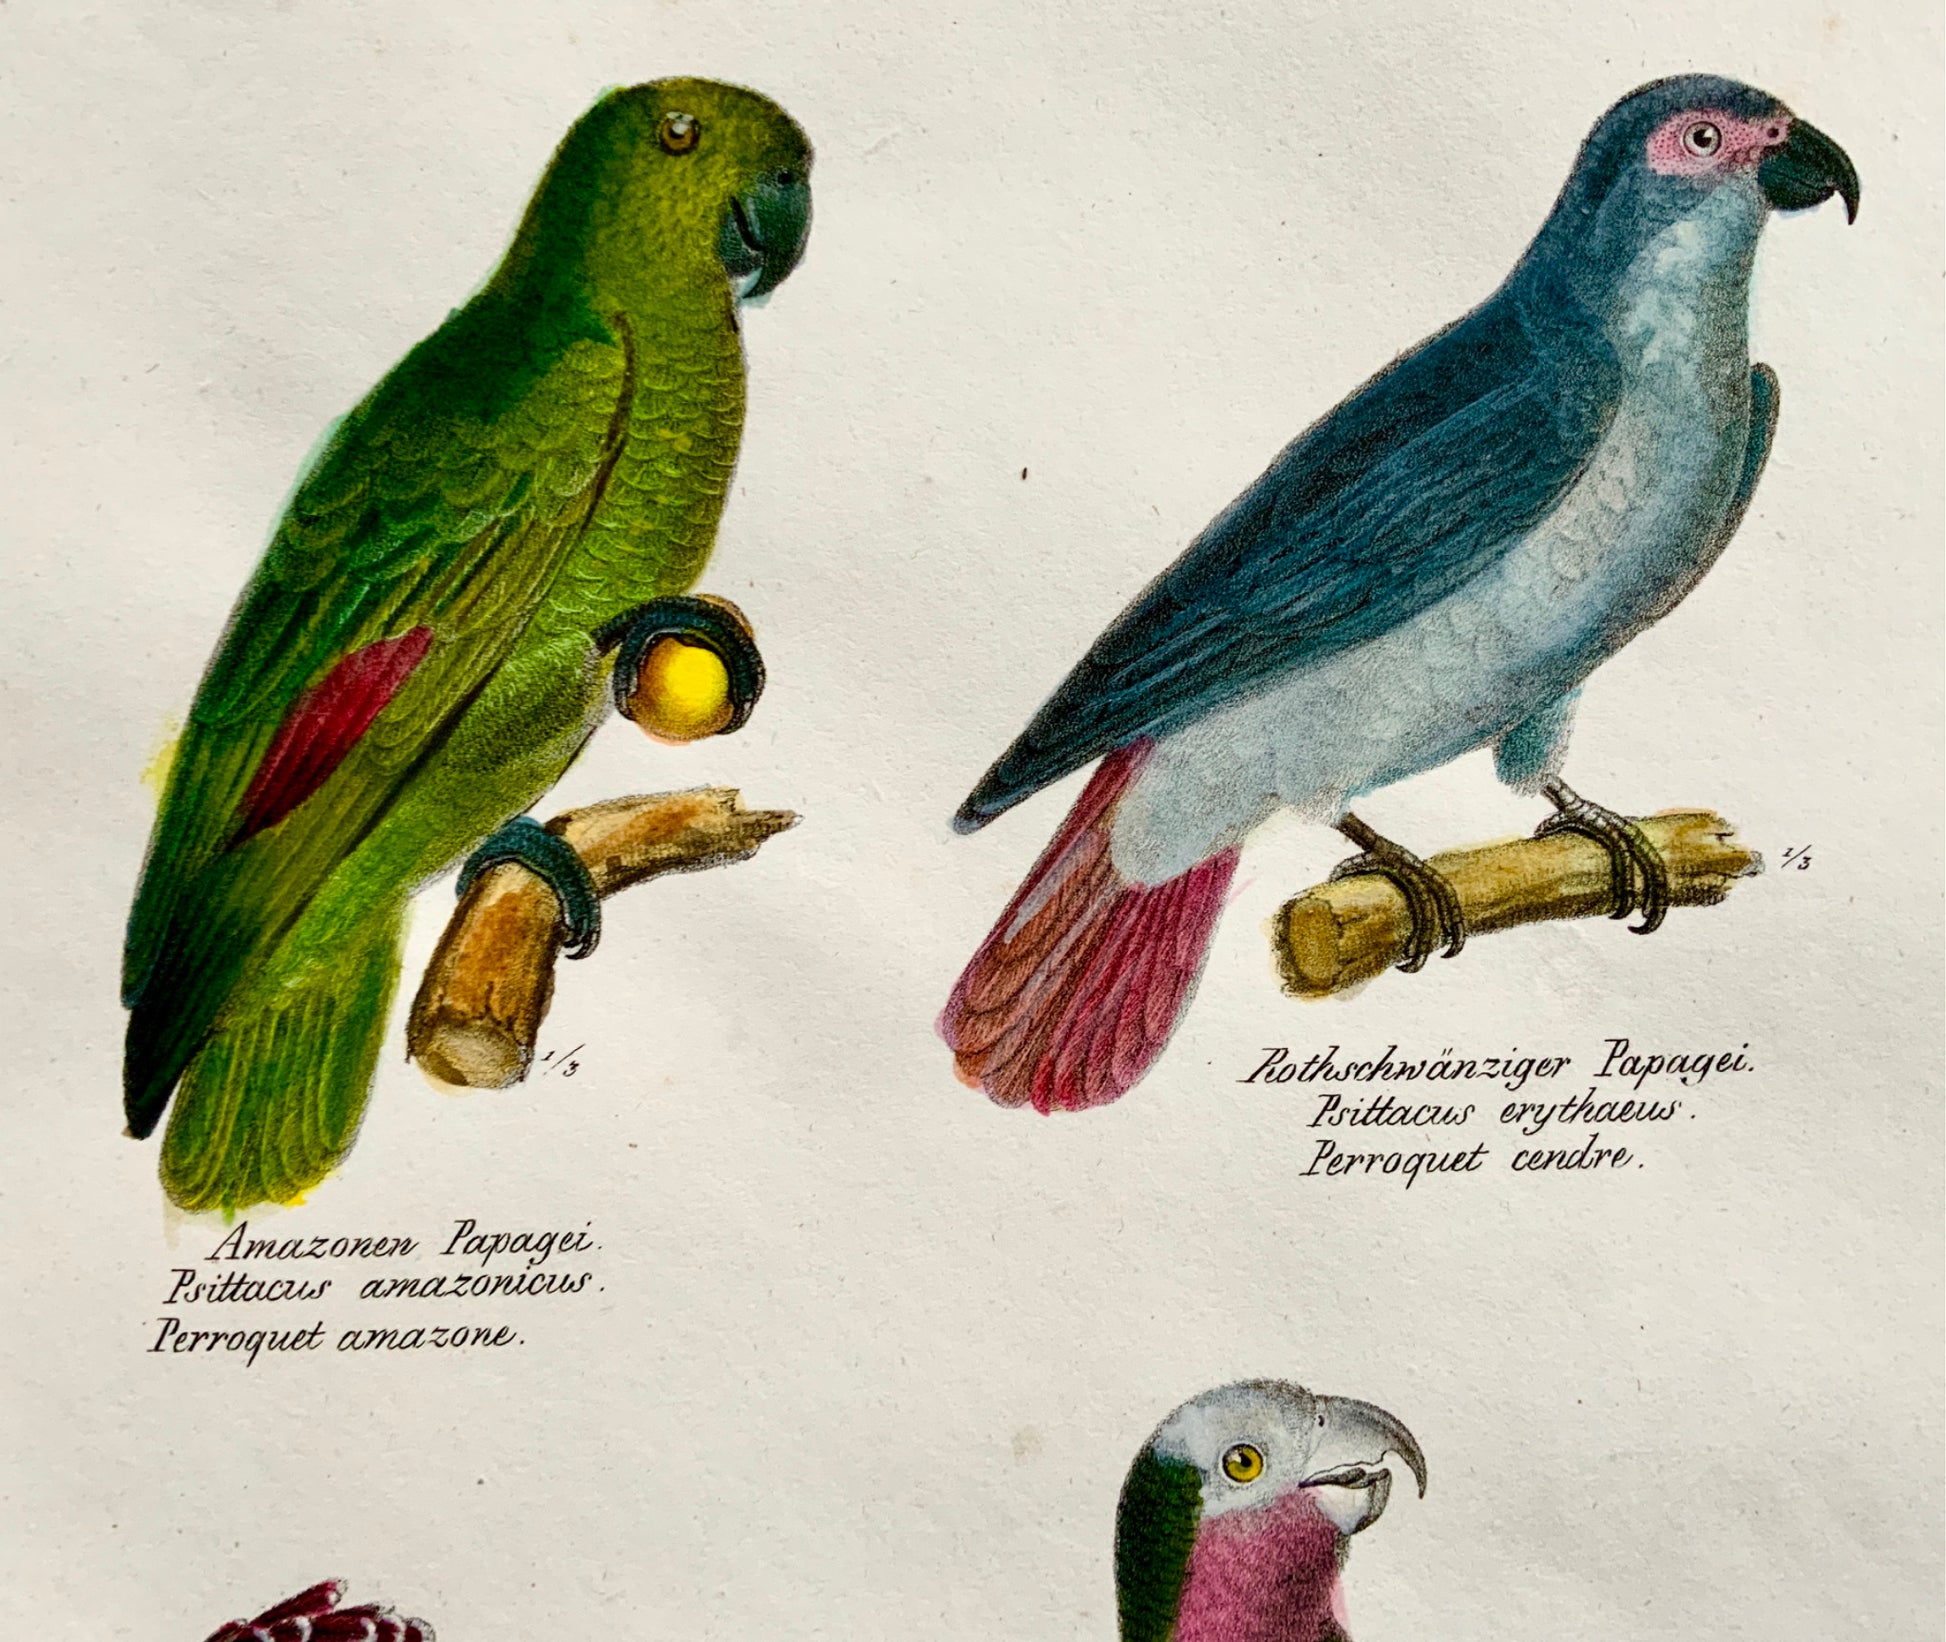 1830 PARROTS Ornithology - Brodtmann hand coloured FOLIO lithography